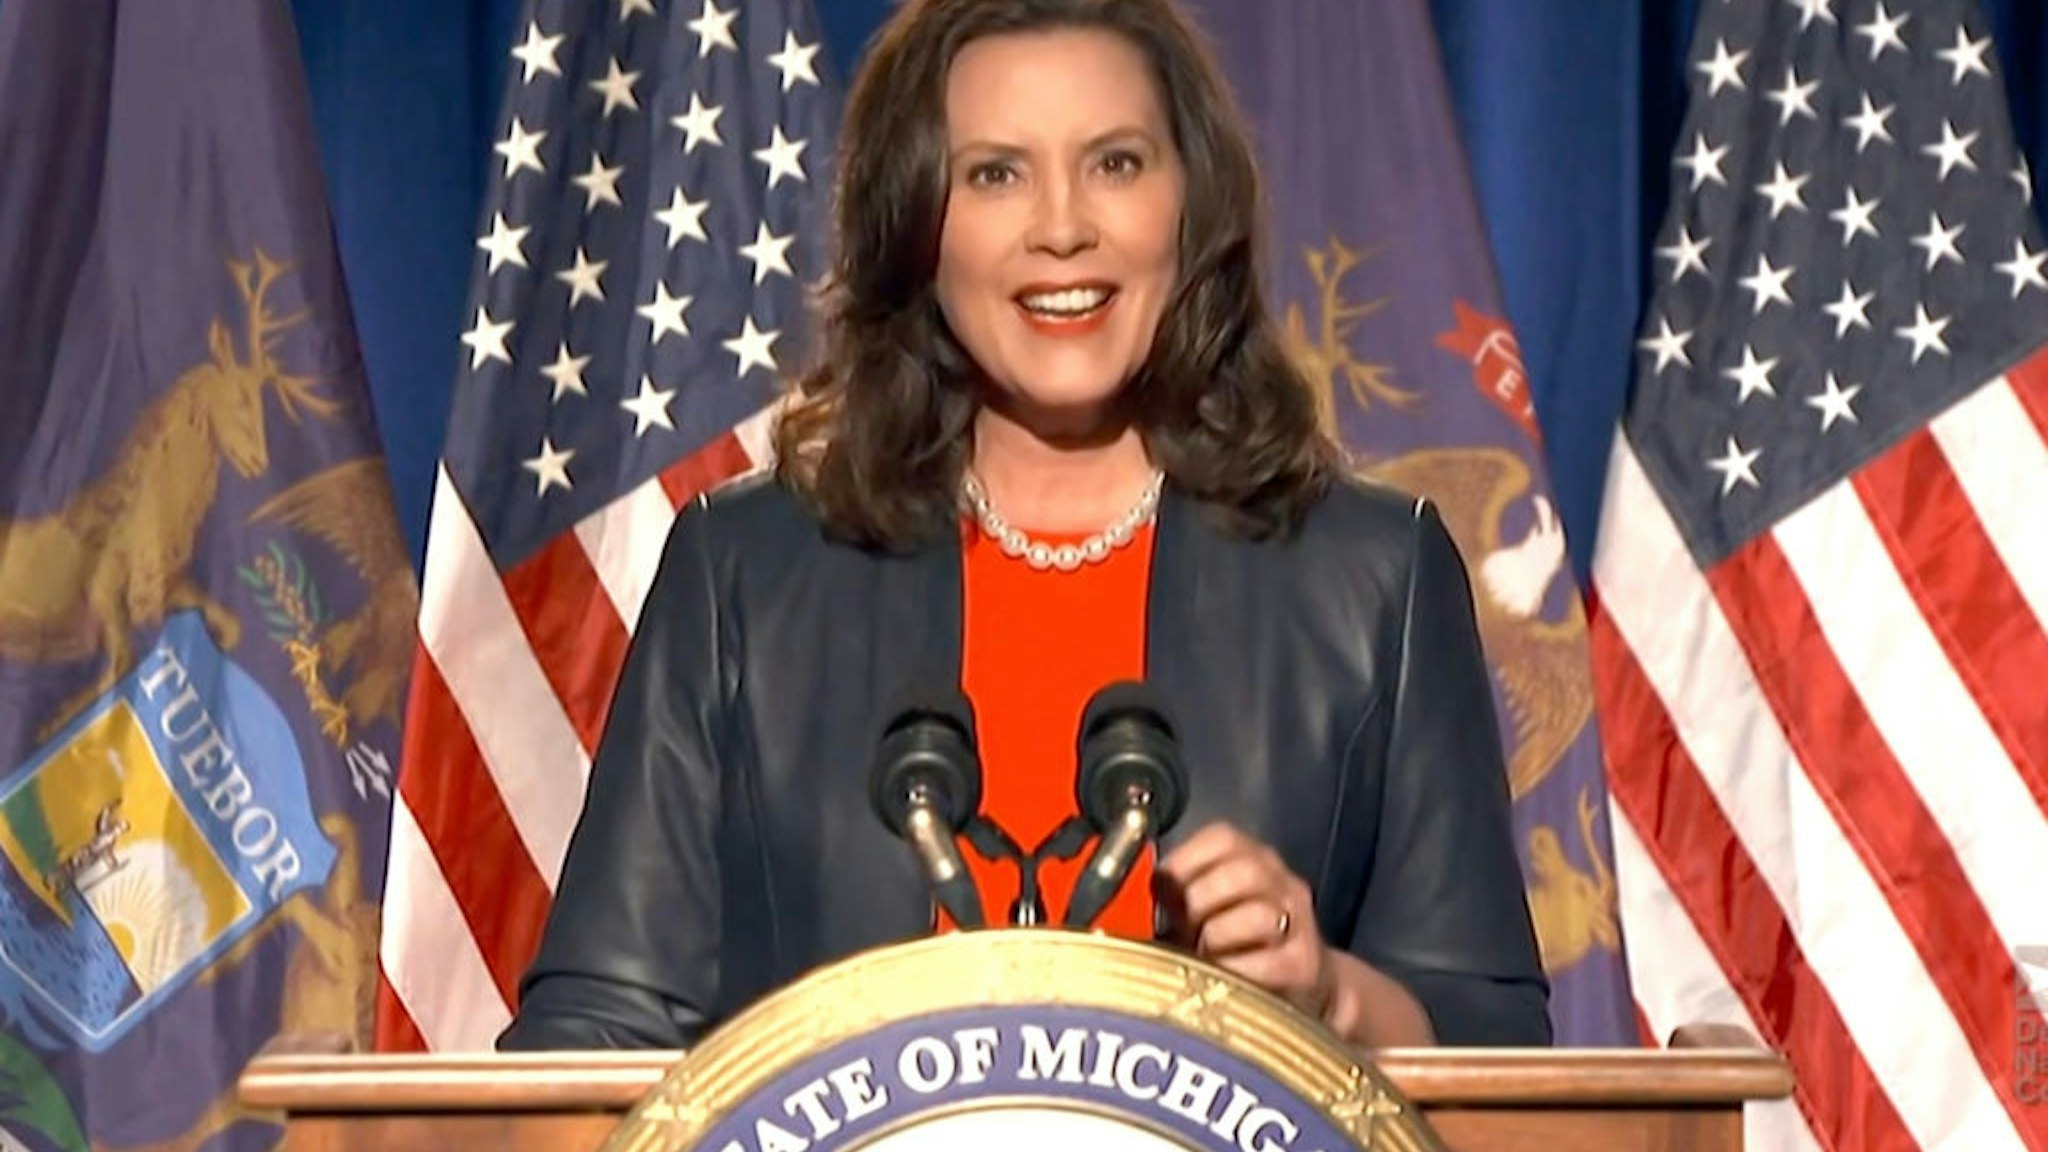 In this screenshot from the DNCC’s livestream of the 2020 Democratic National Convention, Michigan Gov. Gretchen Whitmer addresses the virtual convention on August 17, 2020.